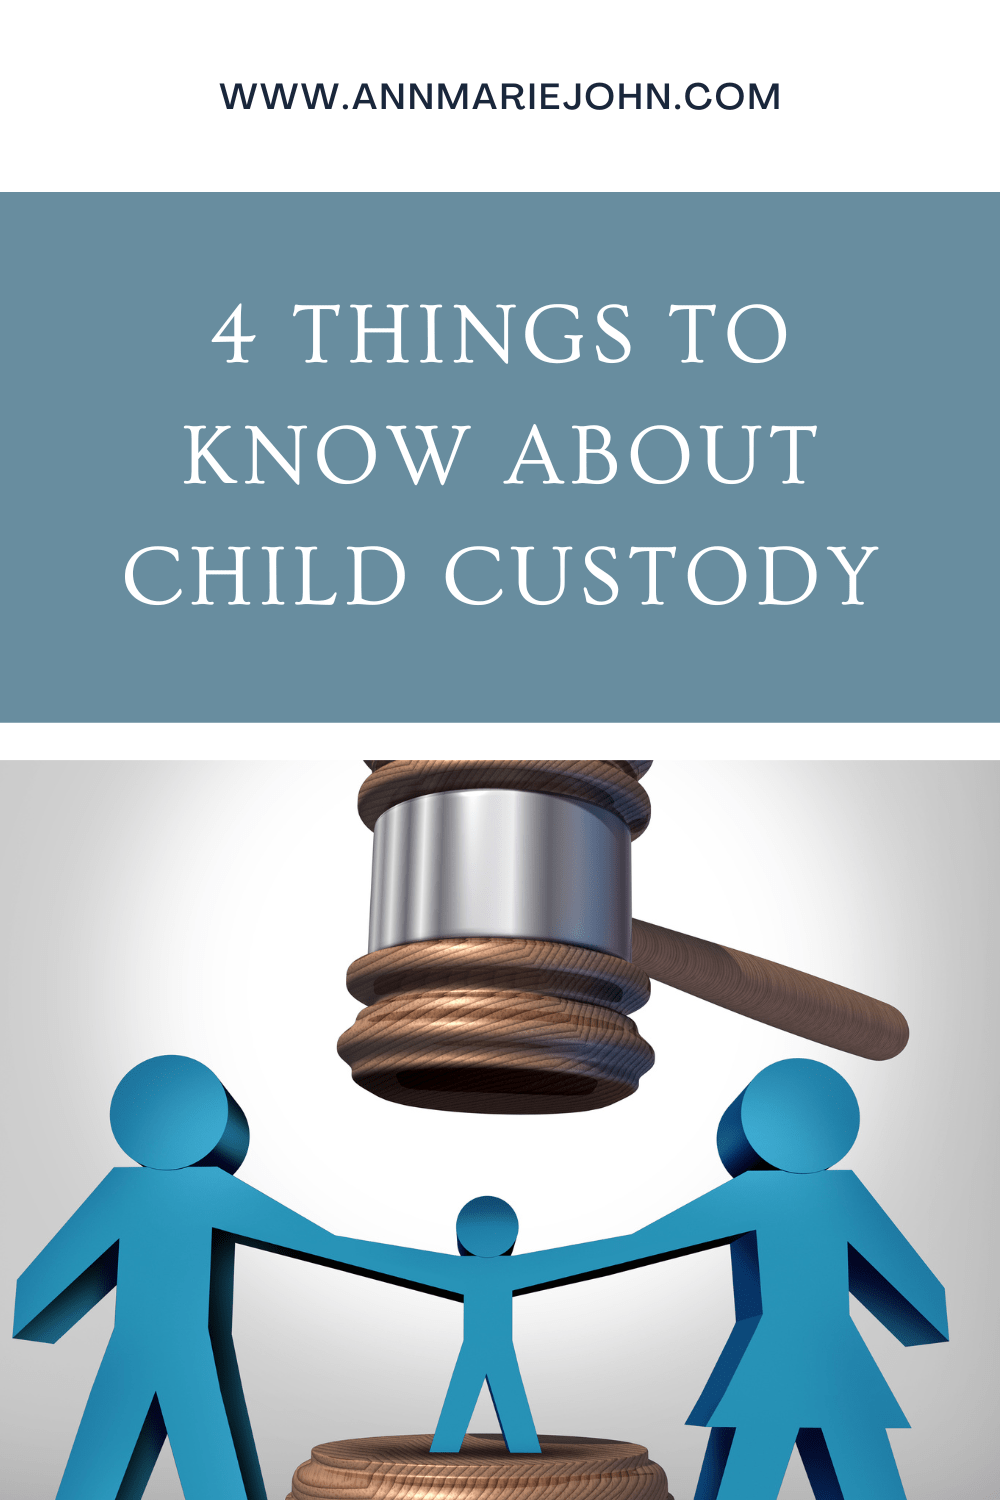 Things to Know About Child Custody